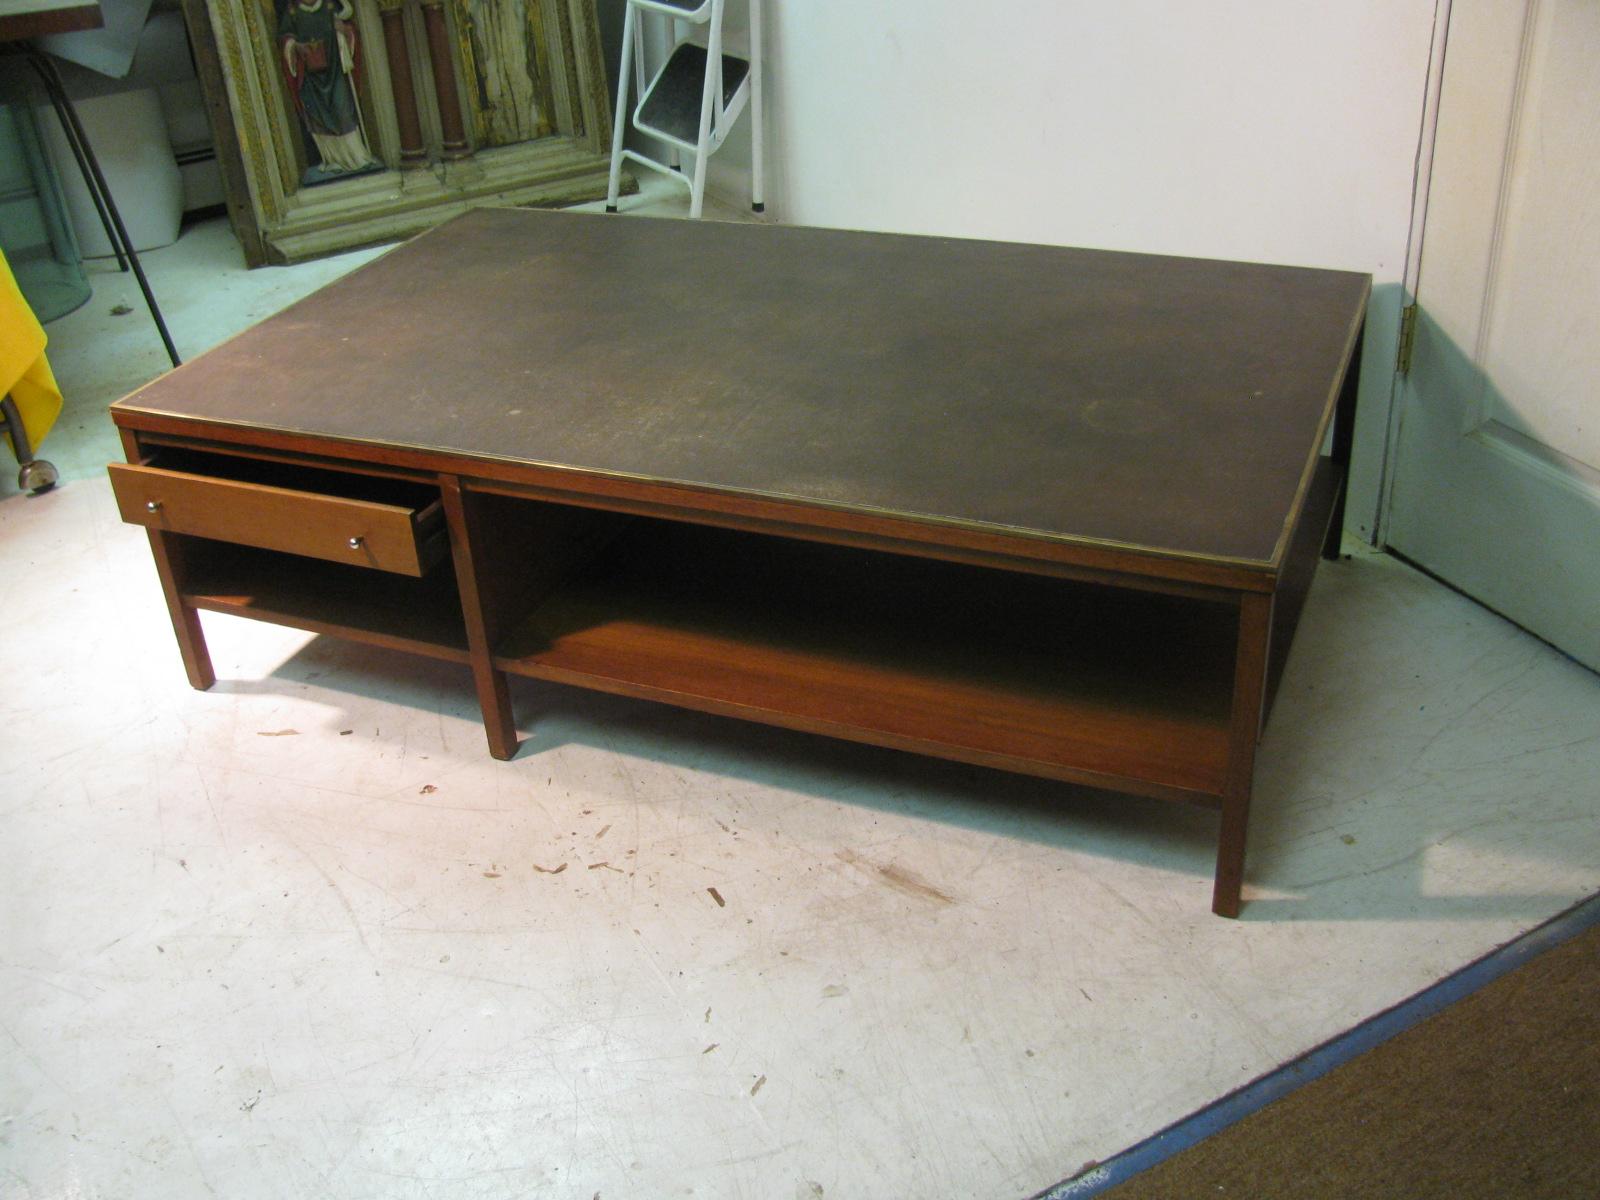 Fabulous leather cocktail table with a single drawer for storage. Created by Paul McCobb for Calvin using walnut with brass trim that surrounds the leather top.